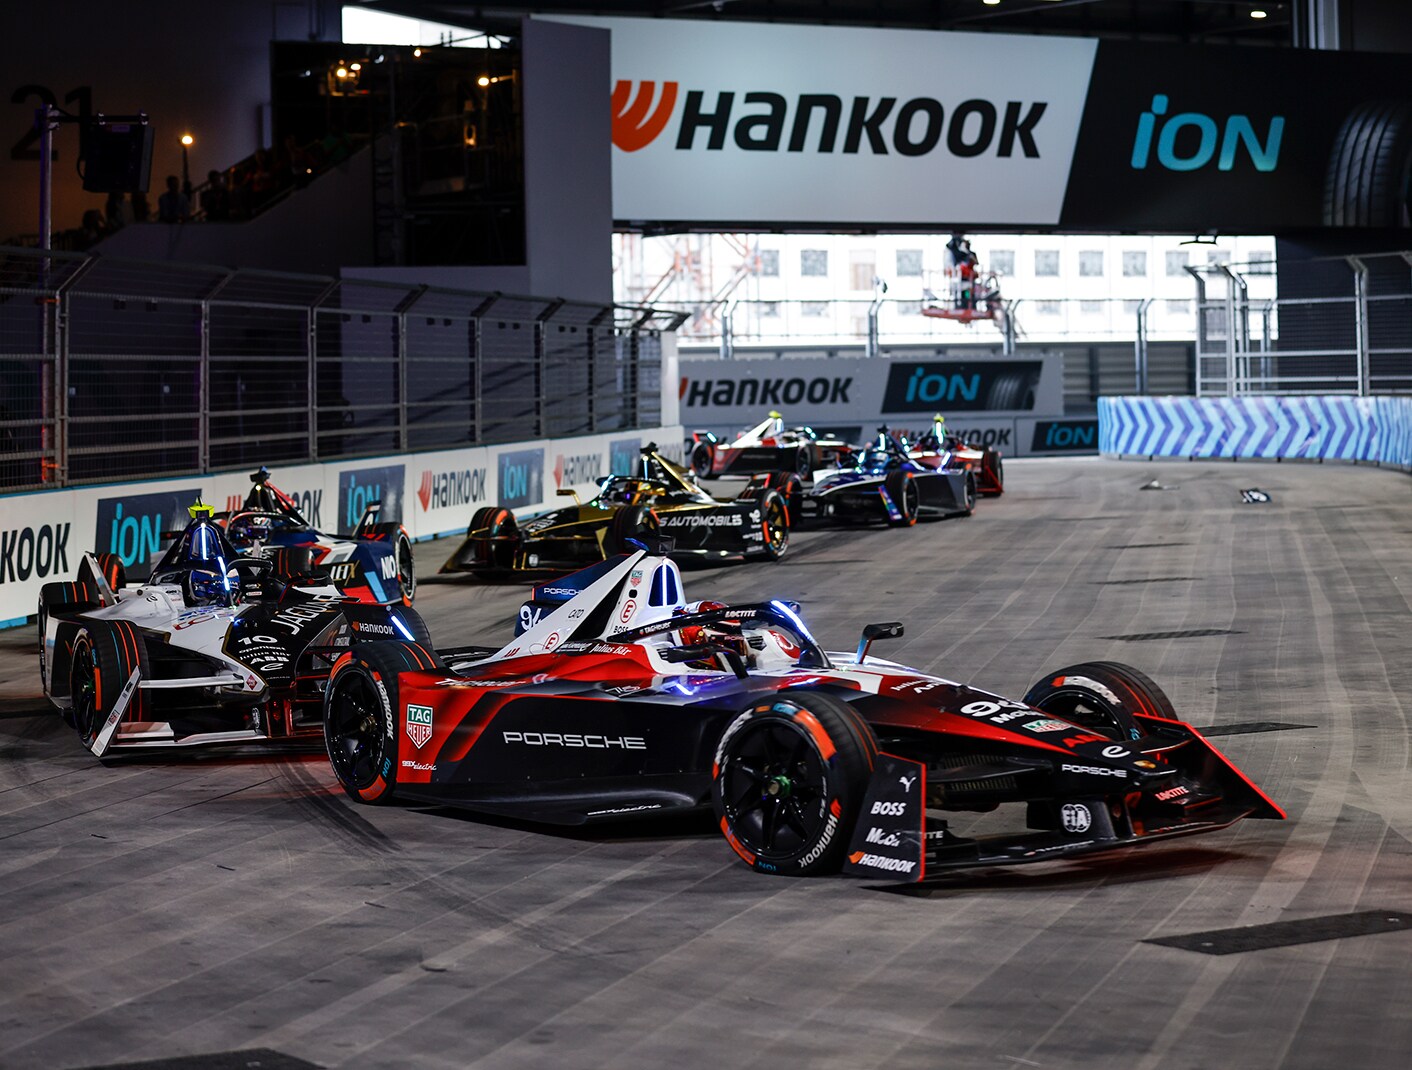 Jake Dennis claims his first Formula E world title at the Hankook London E-Prix